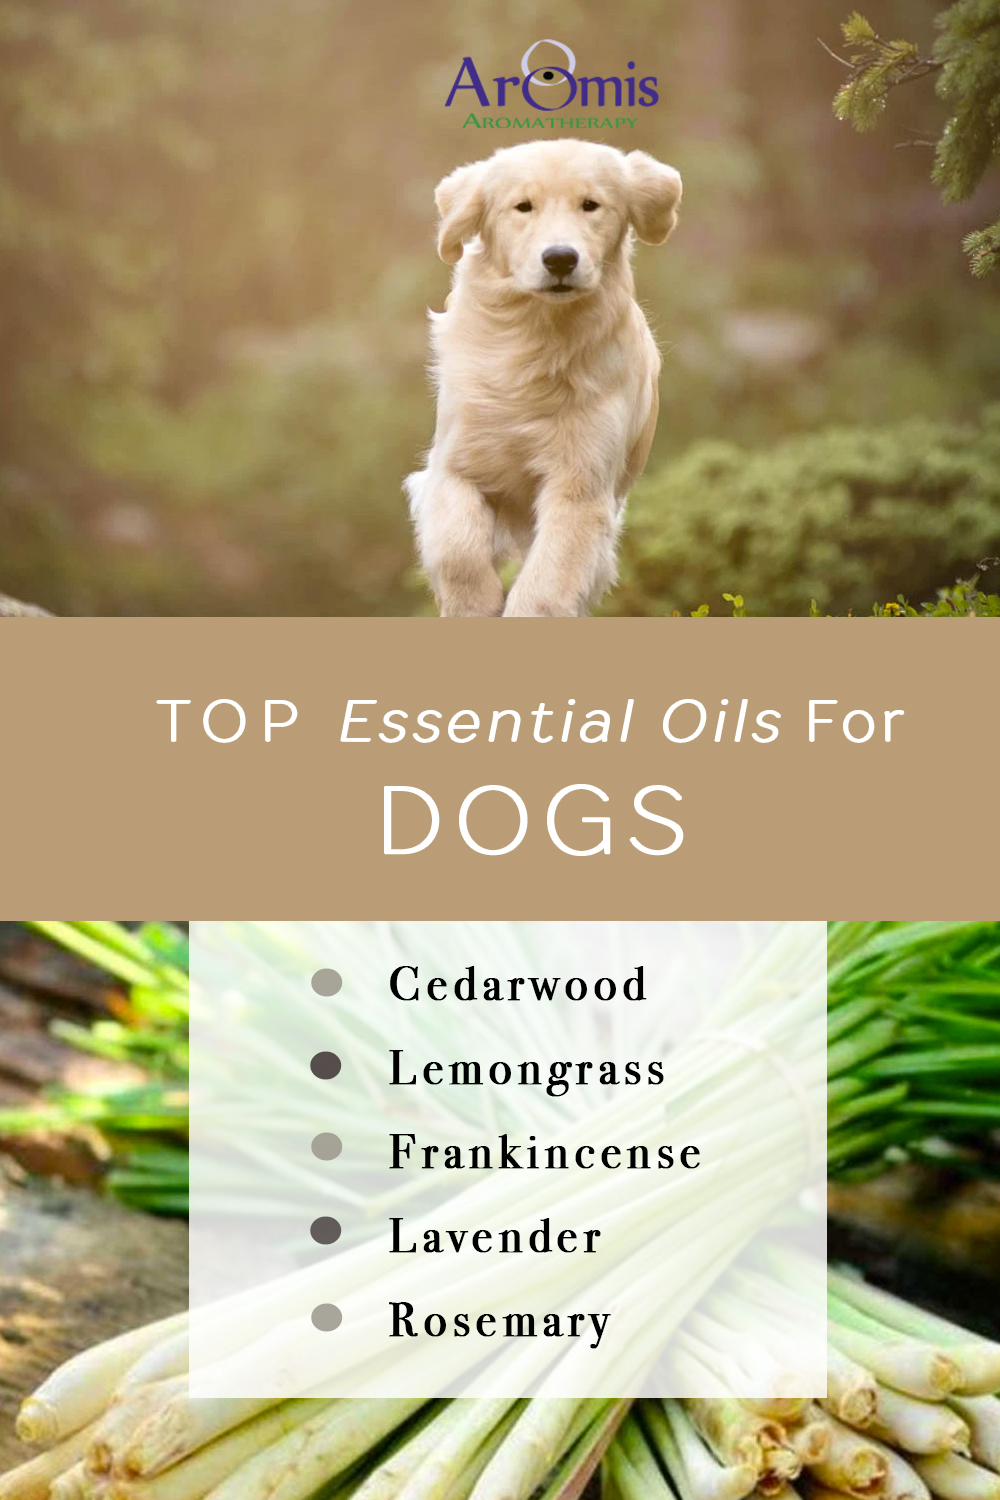 Cheap >can oil diffusers harm dogs big sale - OFF 74%